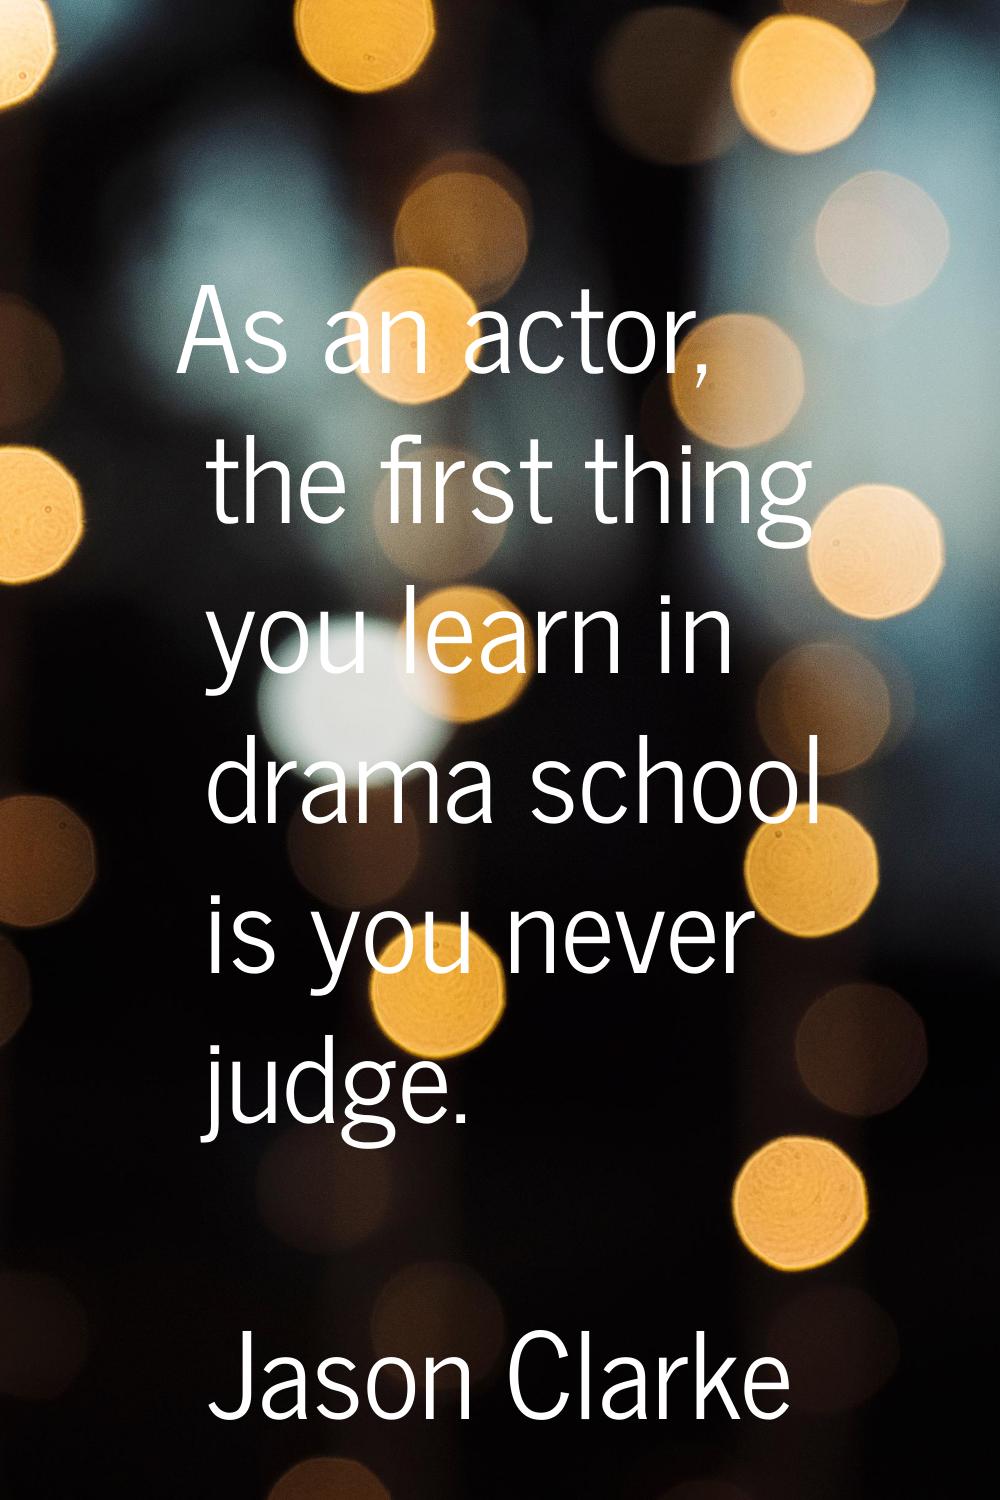 As an actor, the first thing you learn in drama school is you never judge.